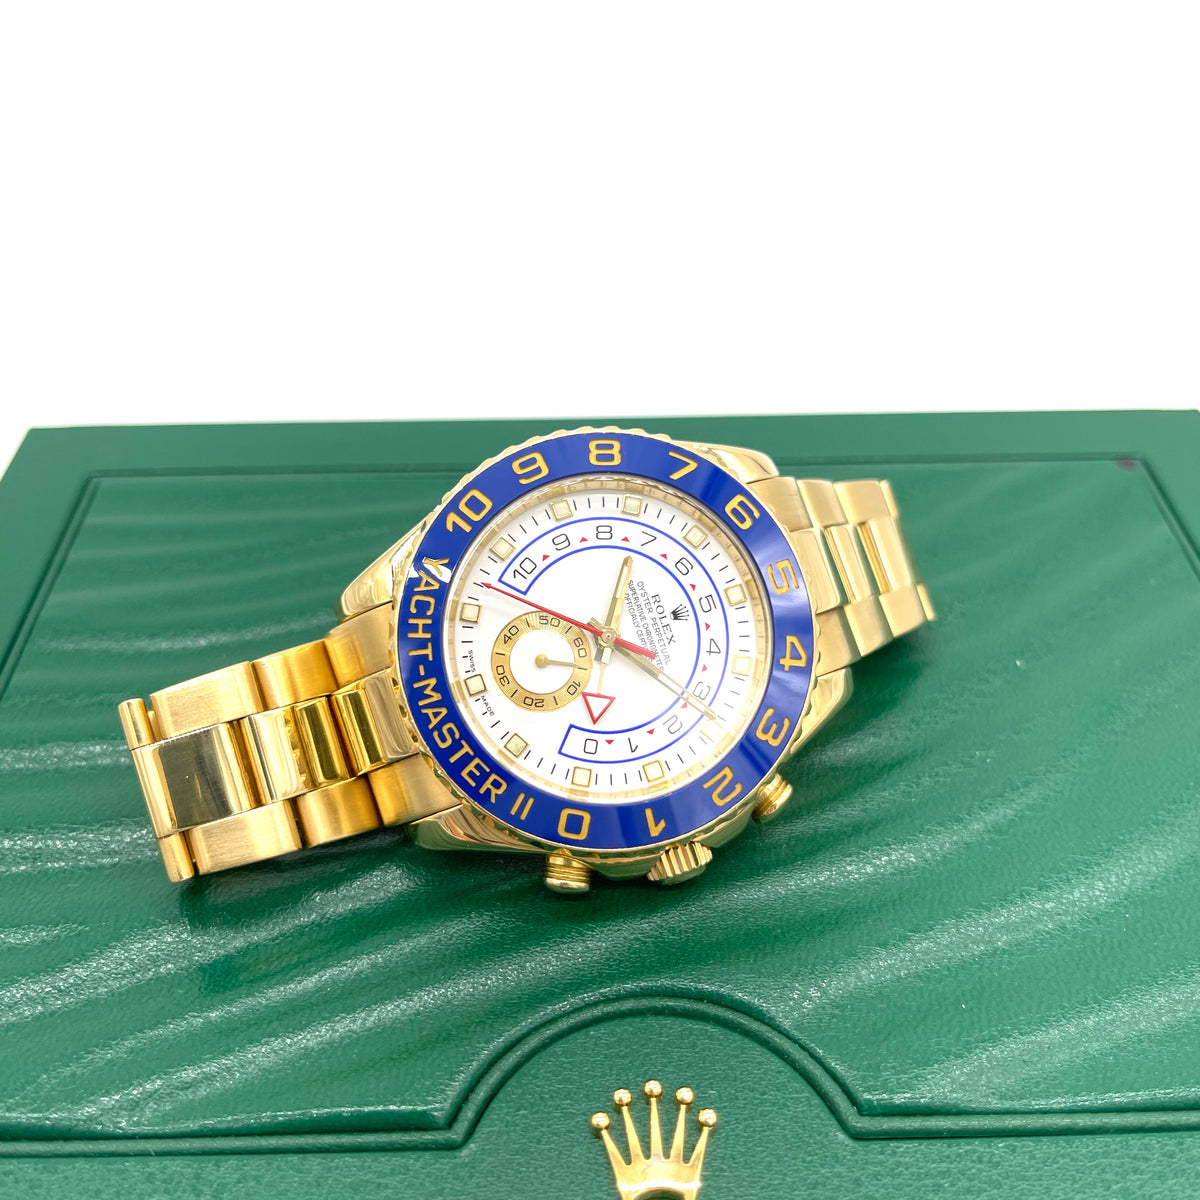 ROLEX YACHT-MASTER II 116688 18ct YELLOW GOLD - Carr Watches